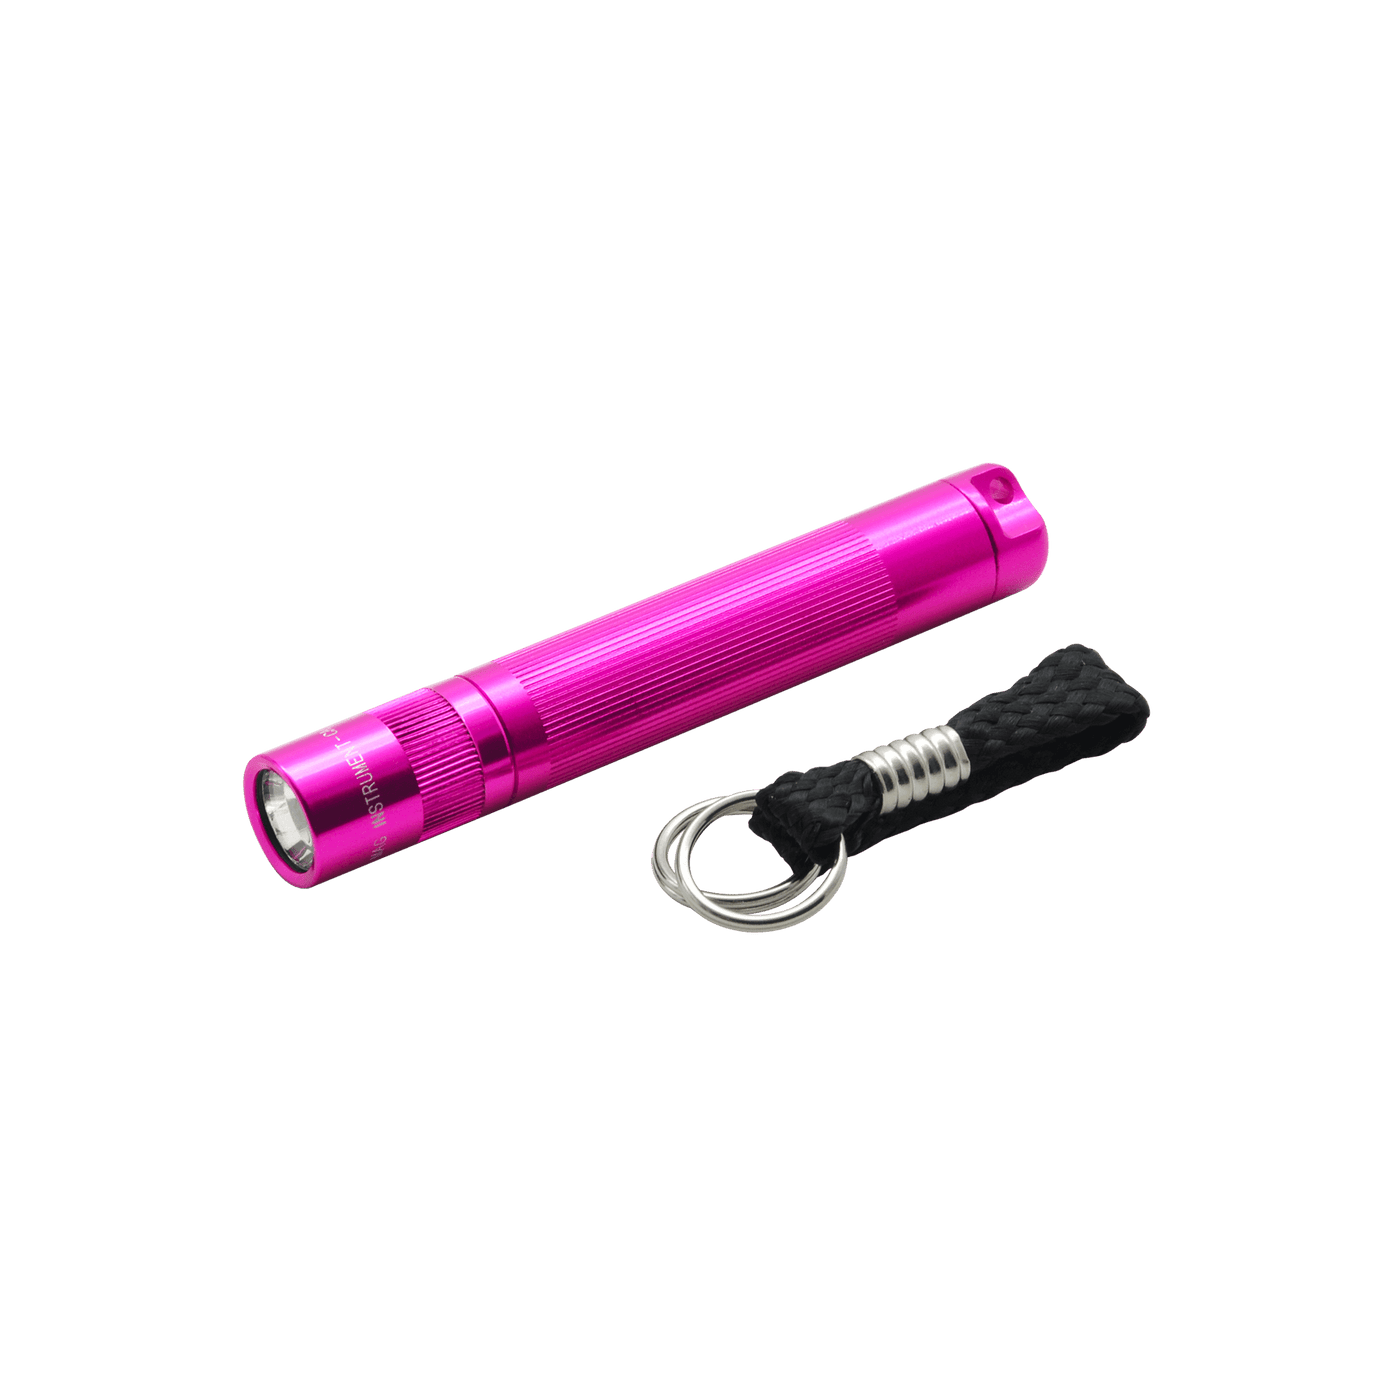 Maglite Solitaire LED Pink Keychain Flashlight